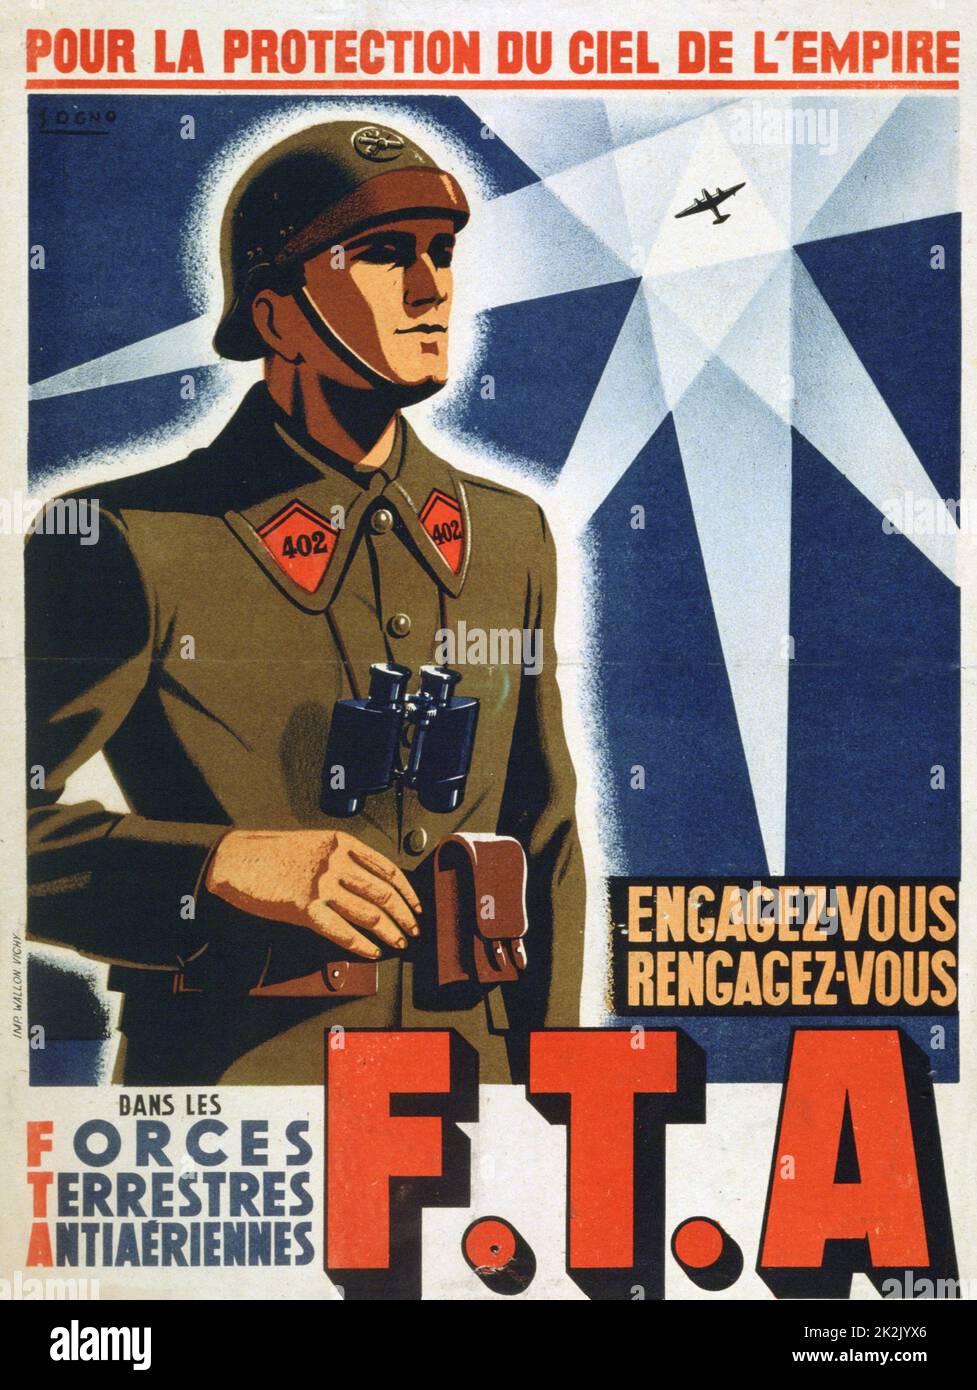 World War II 1939-1945: Recruiting poster for the Forces Terrestres Antiaeriennes, a French anti-aircraft artillery regiment. Stock Photo